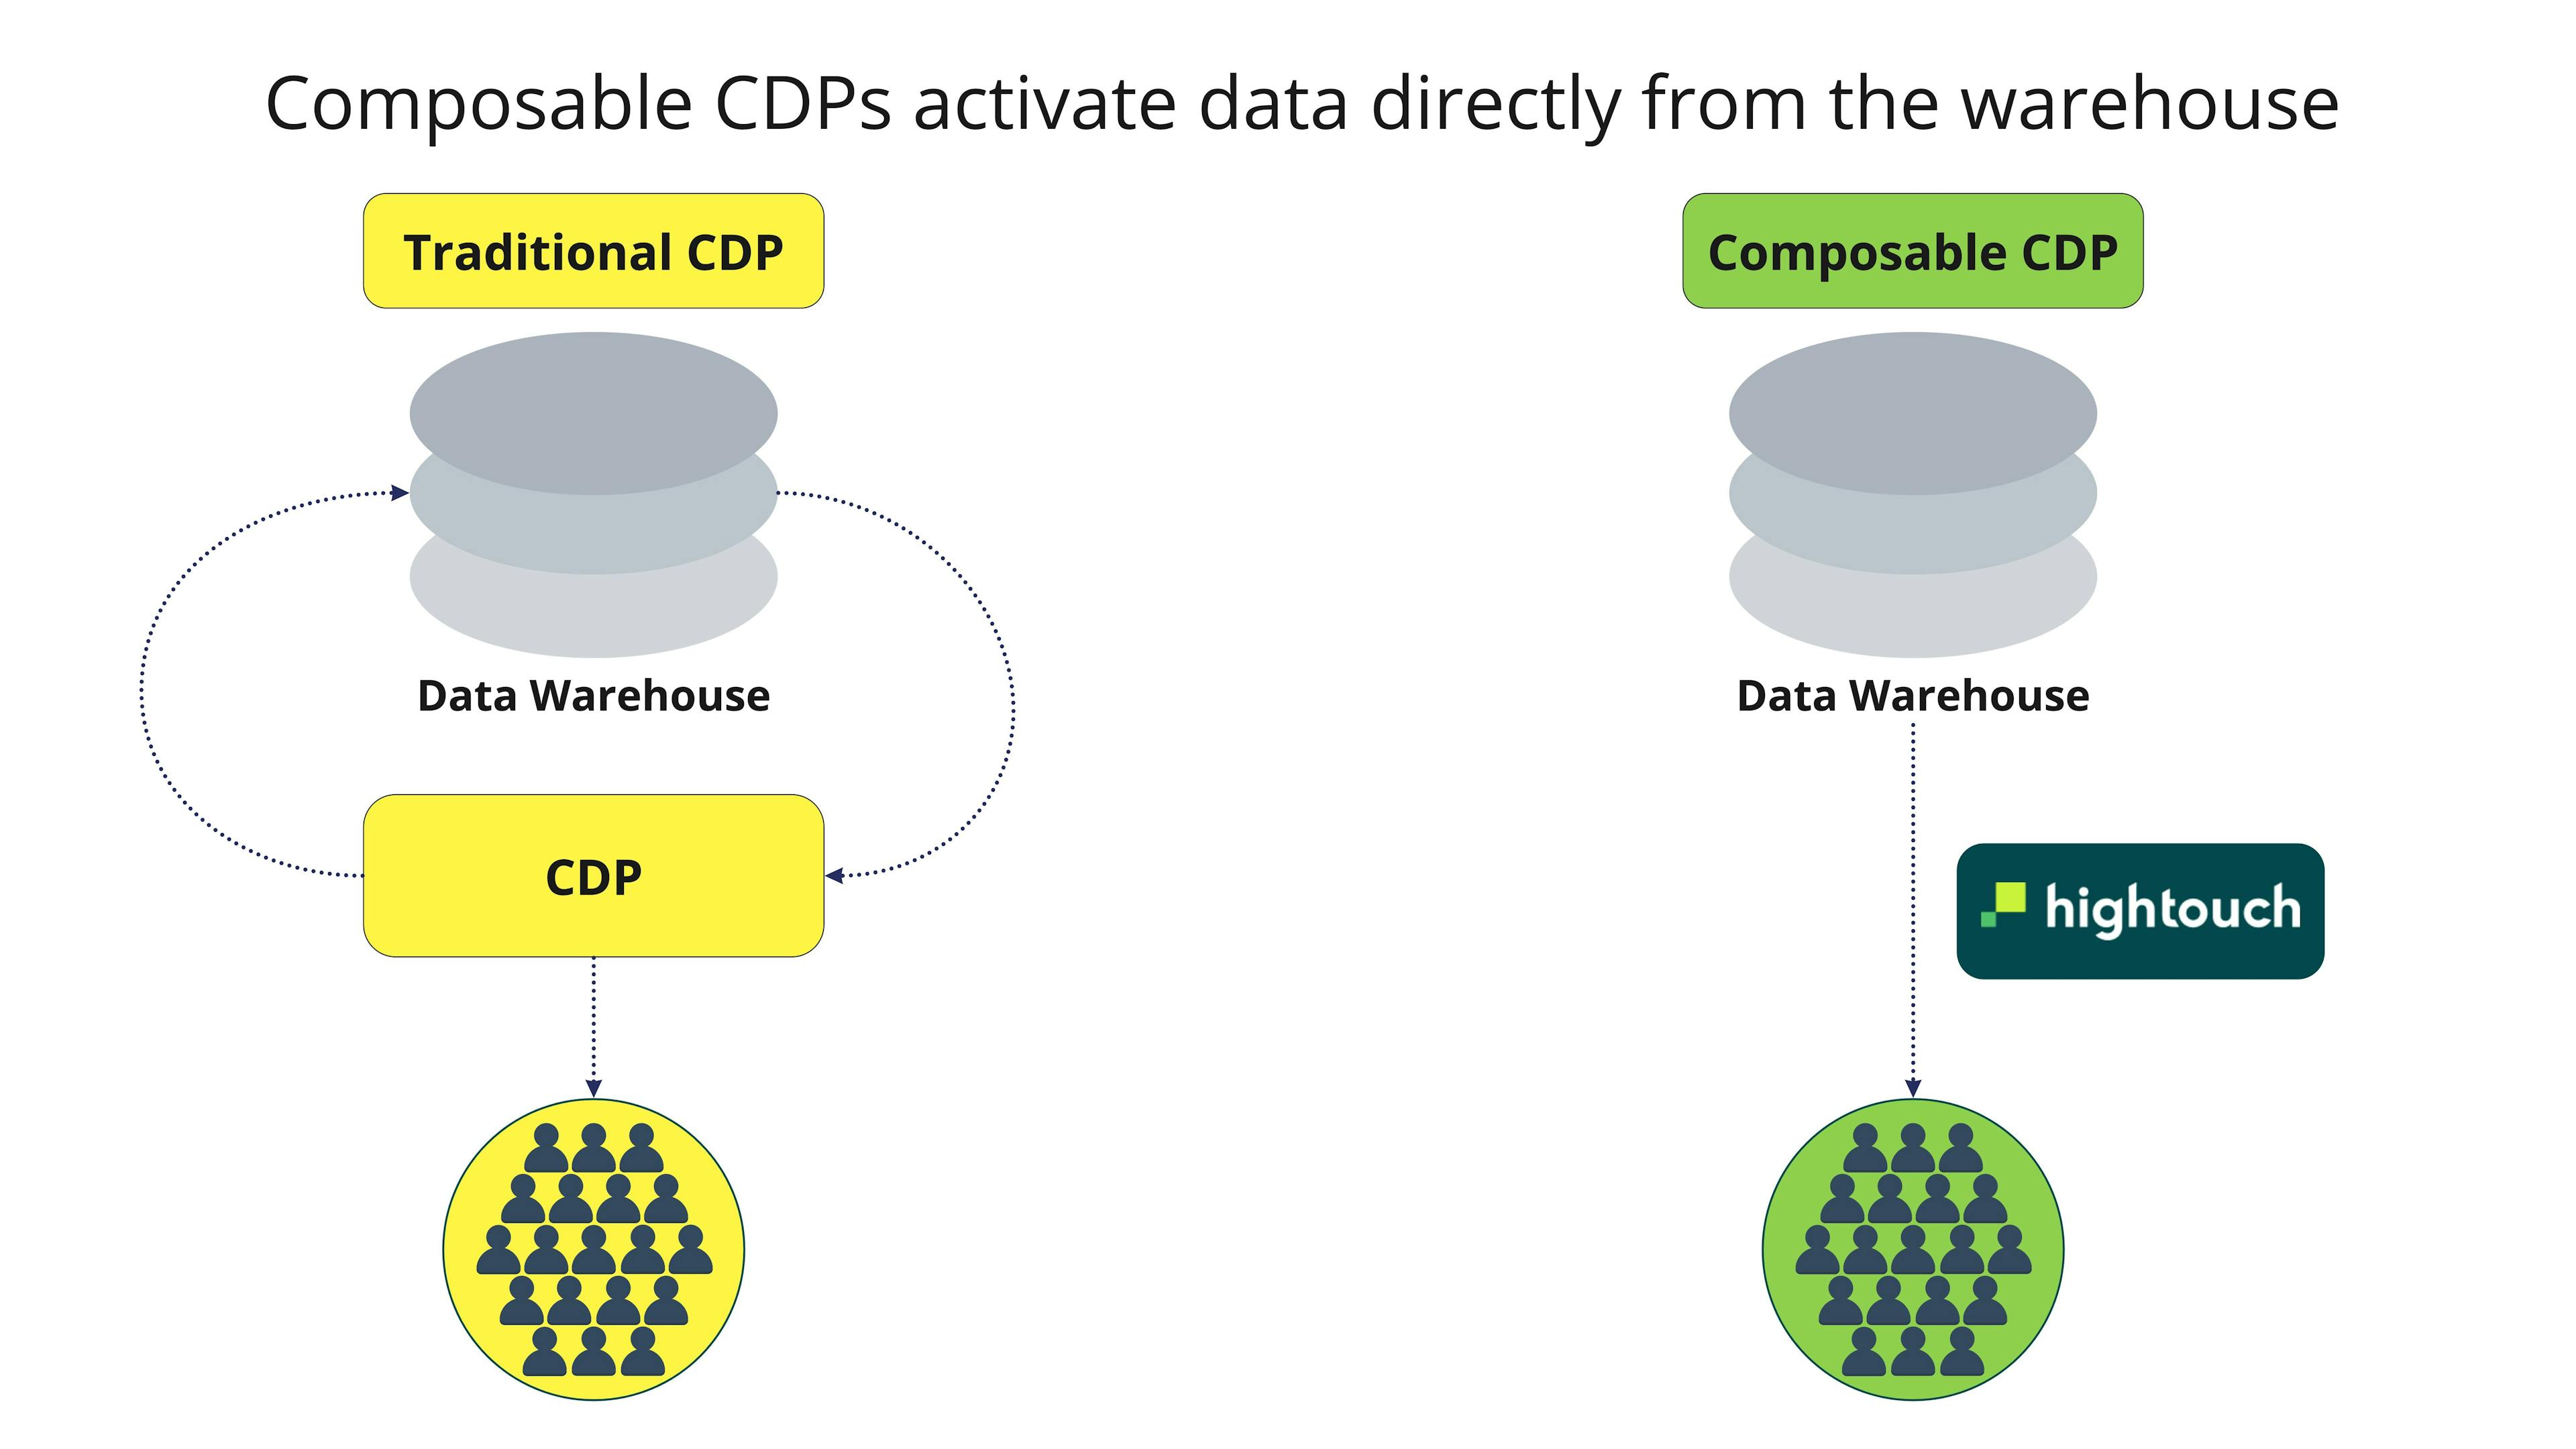 Composable CDPs activate data directly from the warehouse